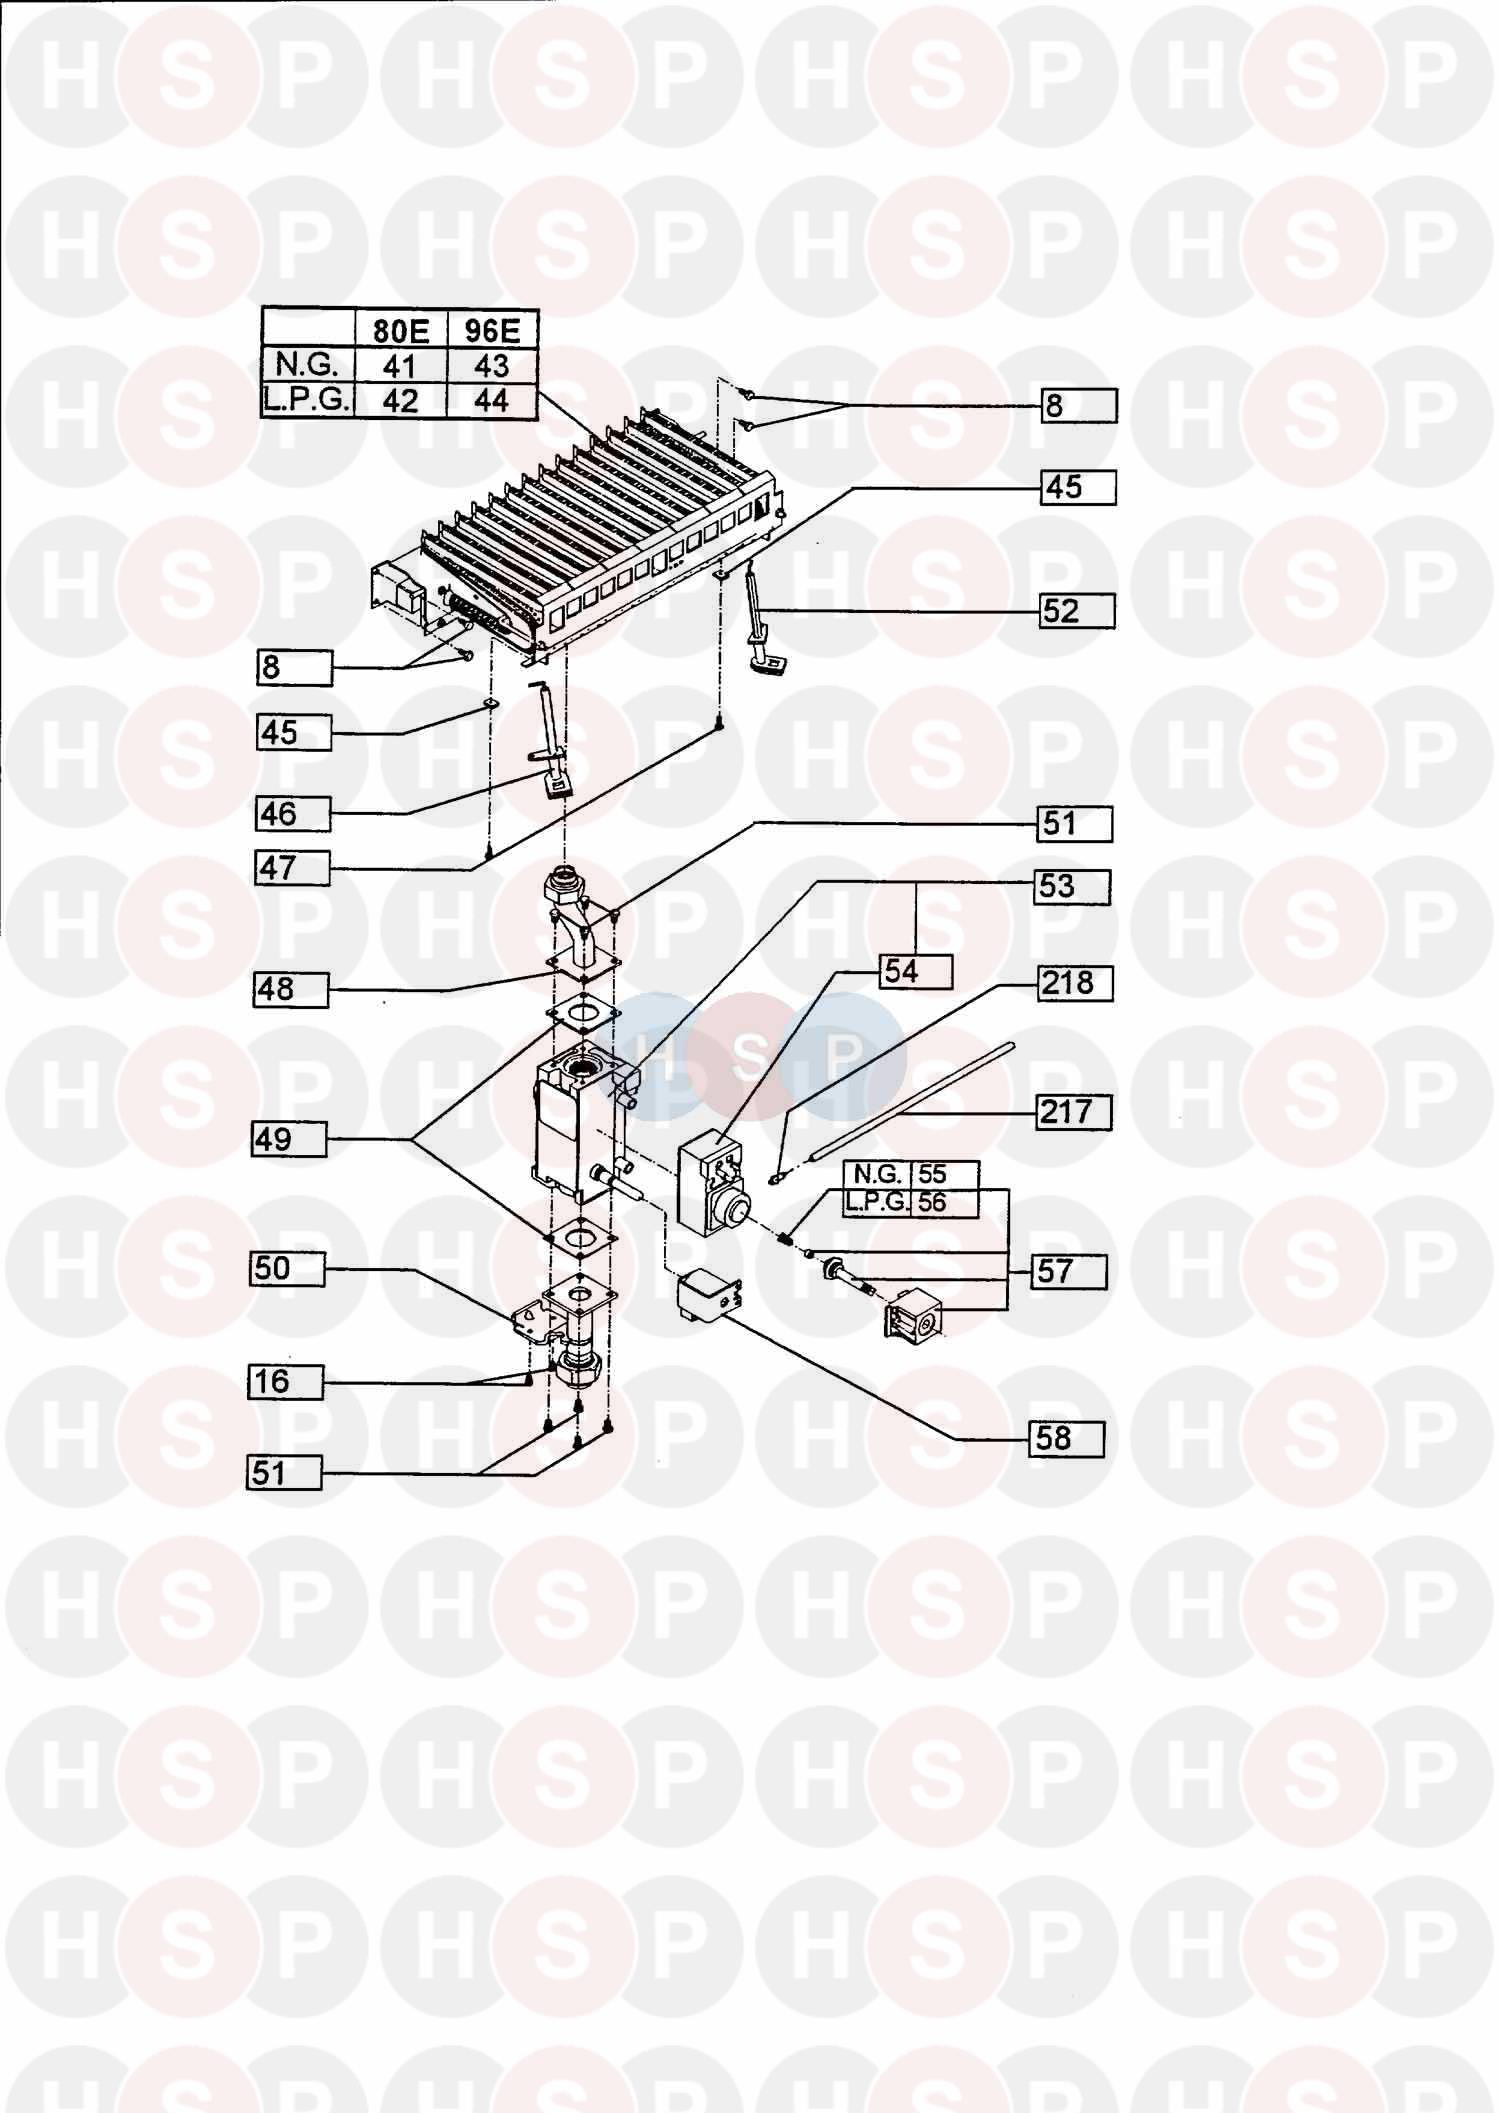 Assembly 1 diagram for Vokera Excel 80E From SNS N5/002184 And N5/052641